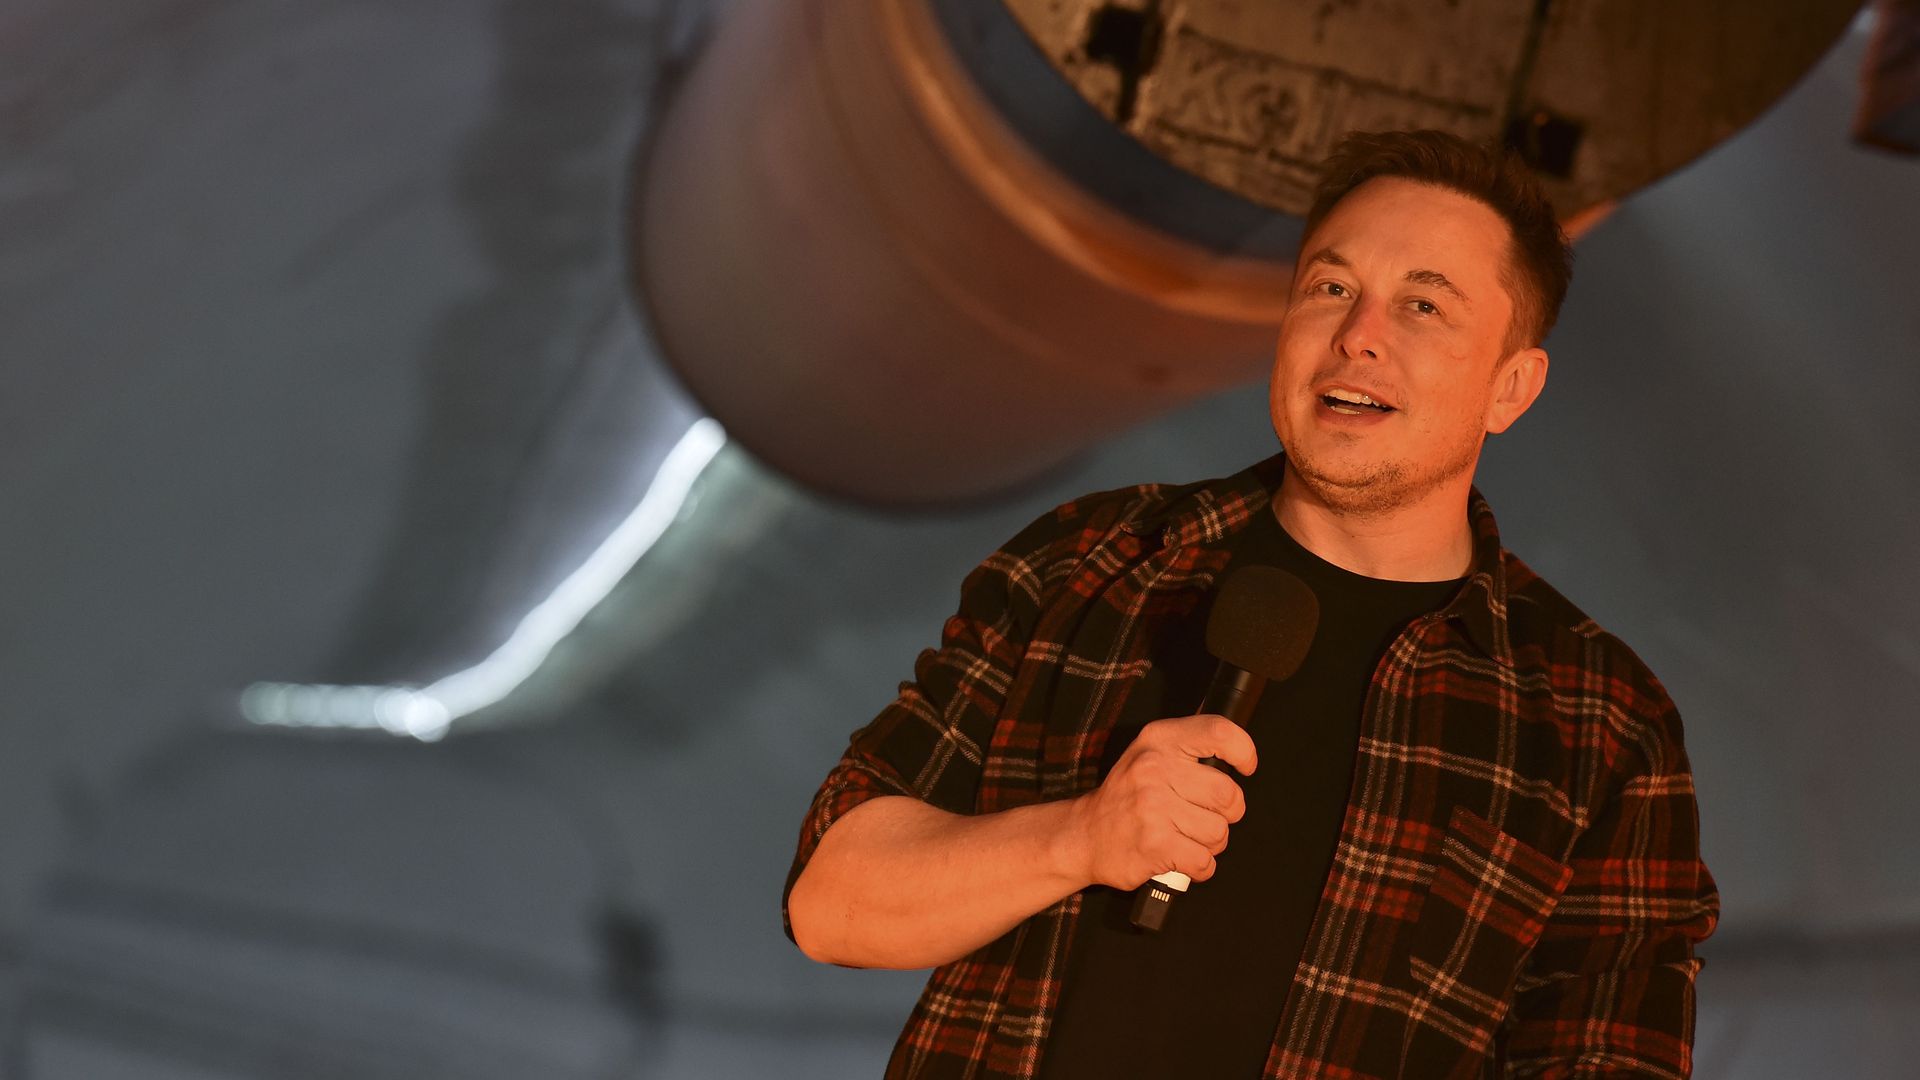 Elon Musk, co-founder and Chief Executive Officer of Tesla Inc., speaks at an unveiling event for The Boring Company Hawthorne test tunnel 